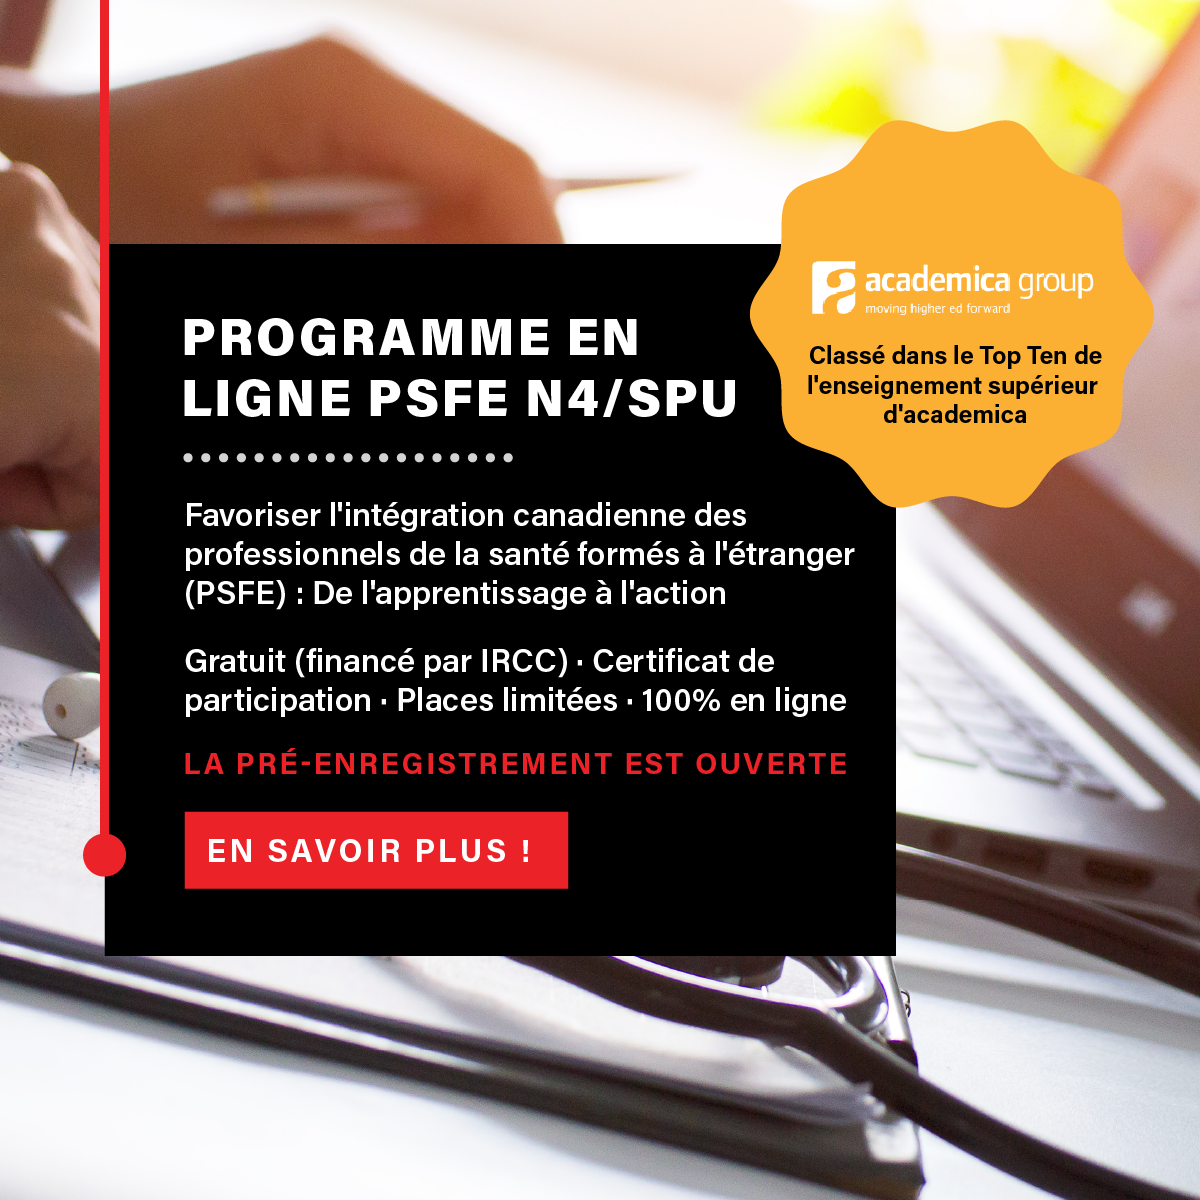 Graphic that gives information about the online N4 / SPU program